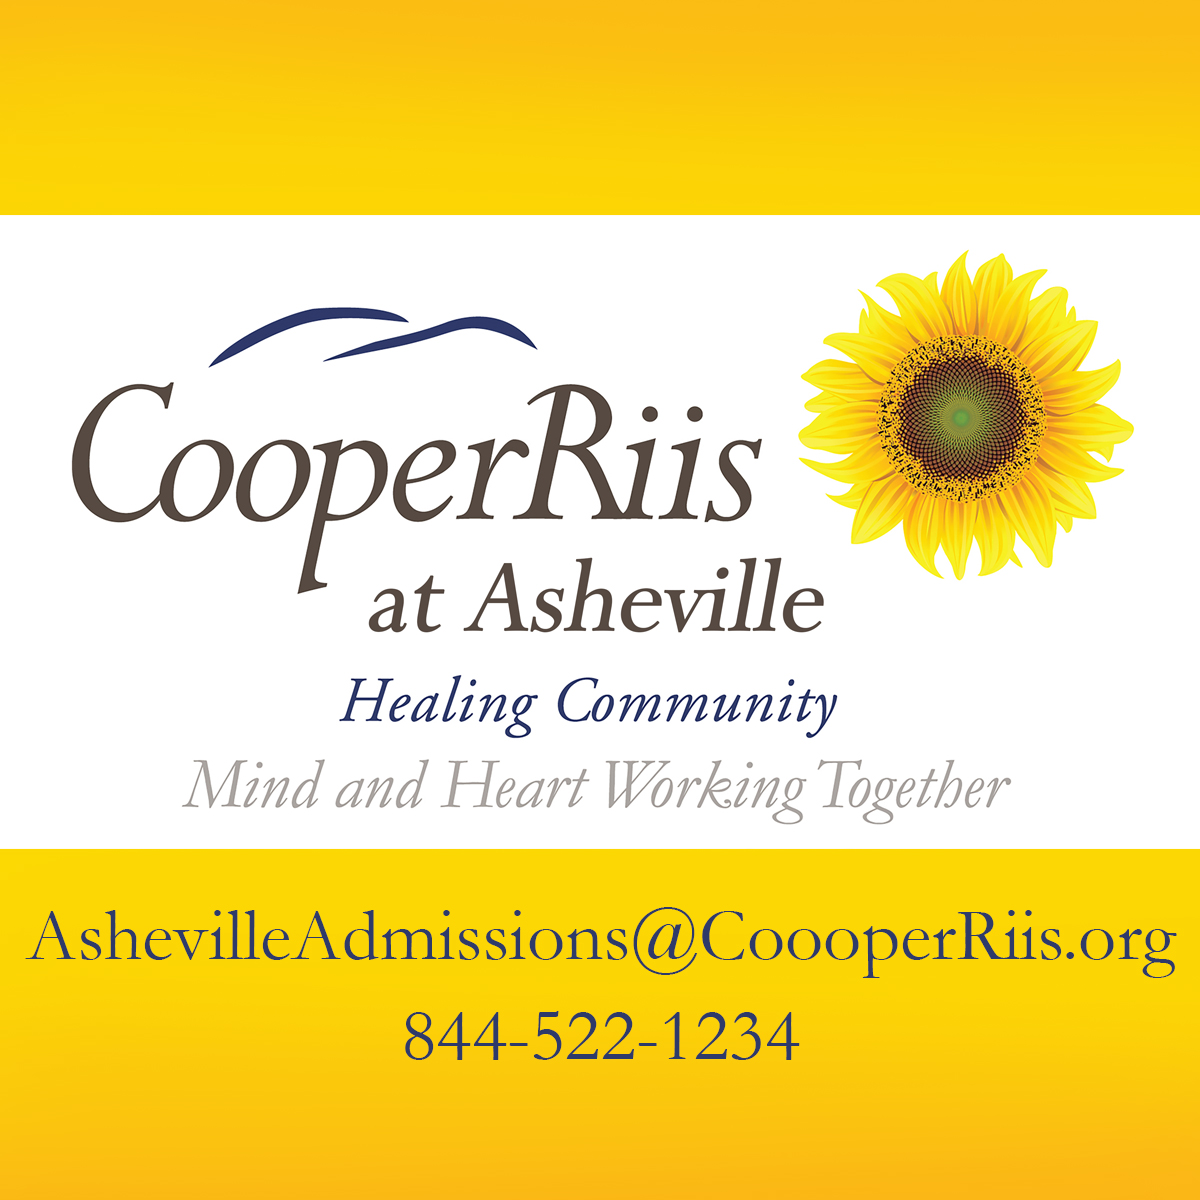 CooperRiis at Asheville Healing Community logo, tagline and admissions phone & email